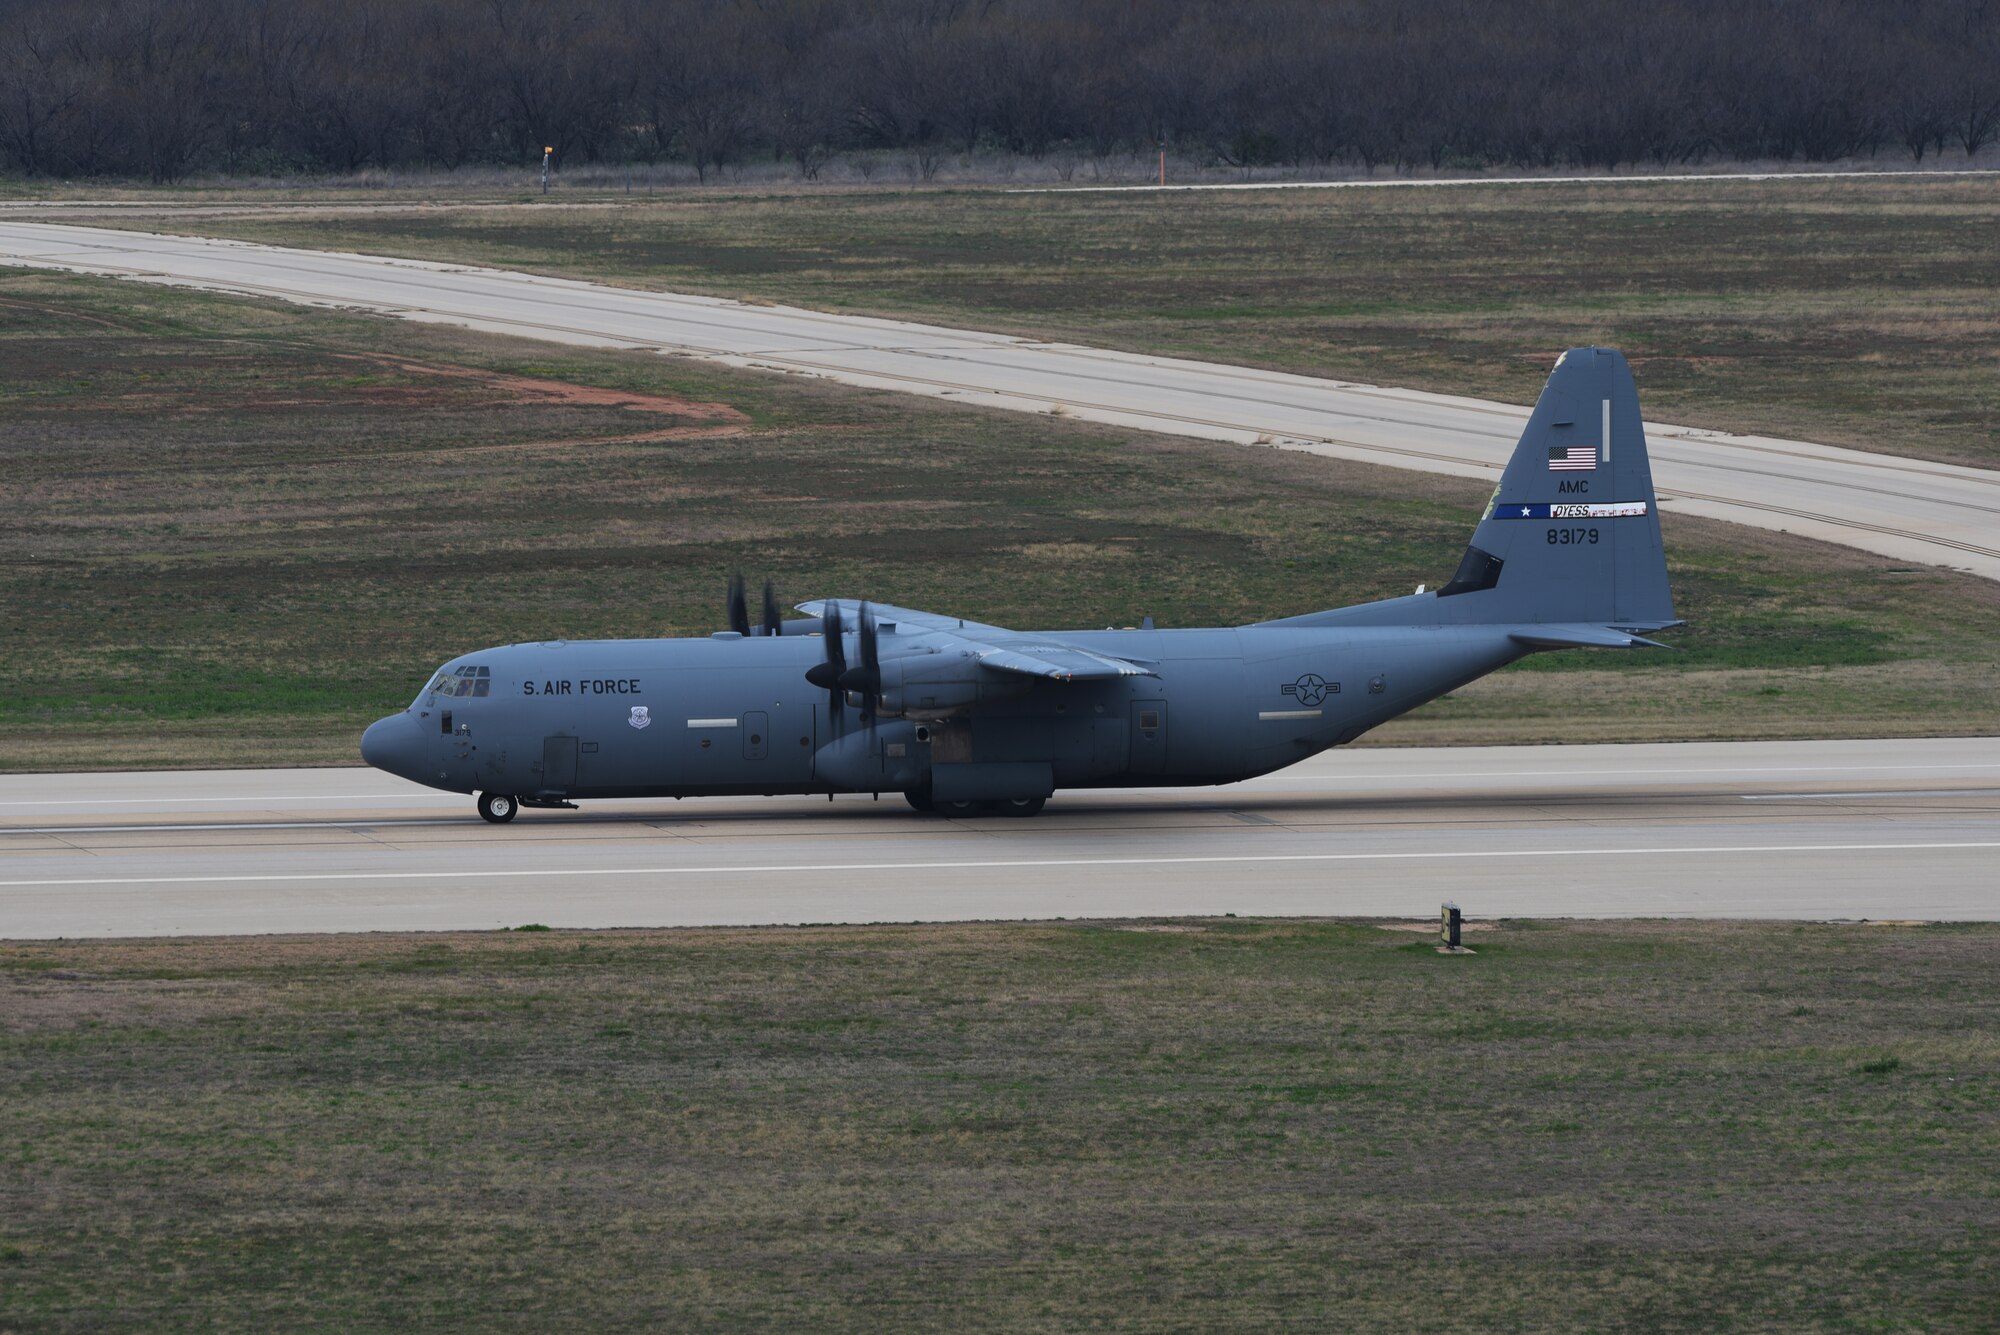 A C-130J Super Hercules taxis on the runway at Dyess Air Force Base, Texas, March 22, 2023. In preparation for possible inclement weather, Dyess Airmen rapidly prepared over a dozen aircraft to relocate, successfully demonstrating America’s Lift and Strike Base’s ability to achieve dynamic force employment while using agile combat employment. The B-1s were temporarily relocated to Holloman Air Force Base, New Mexico, while the C-130s flew to several airfields throughout the United States. (U.S. Air Force photo by Senior Airman Sophia Robello)